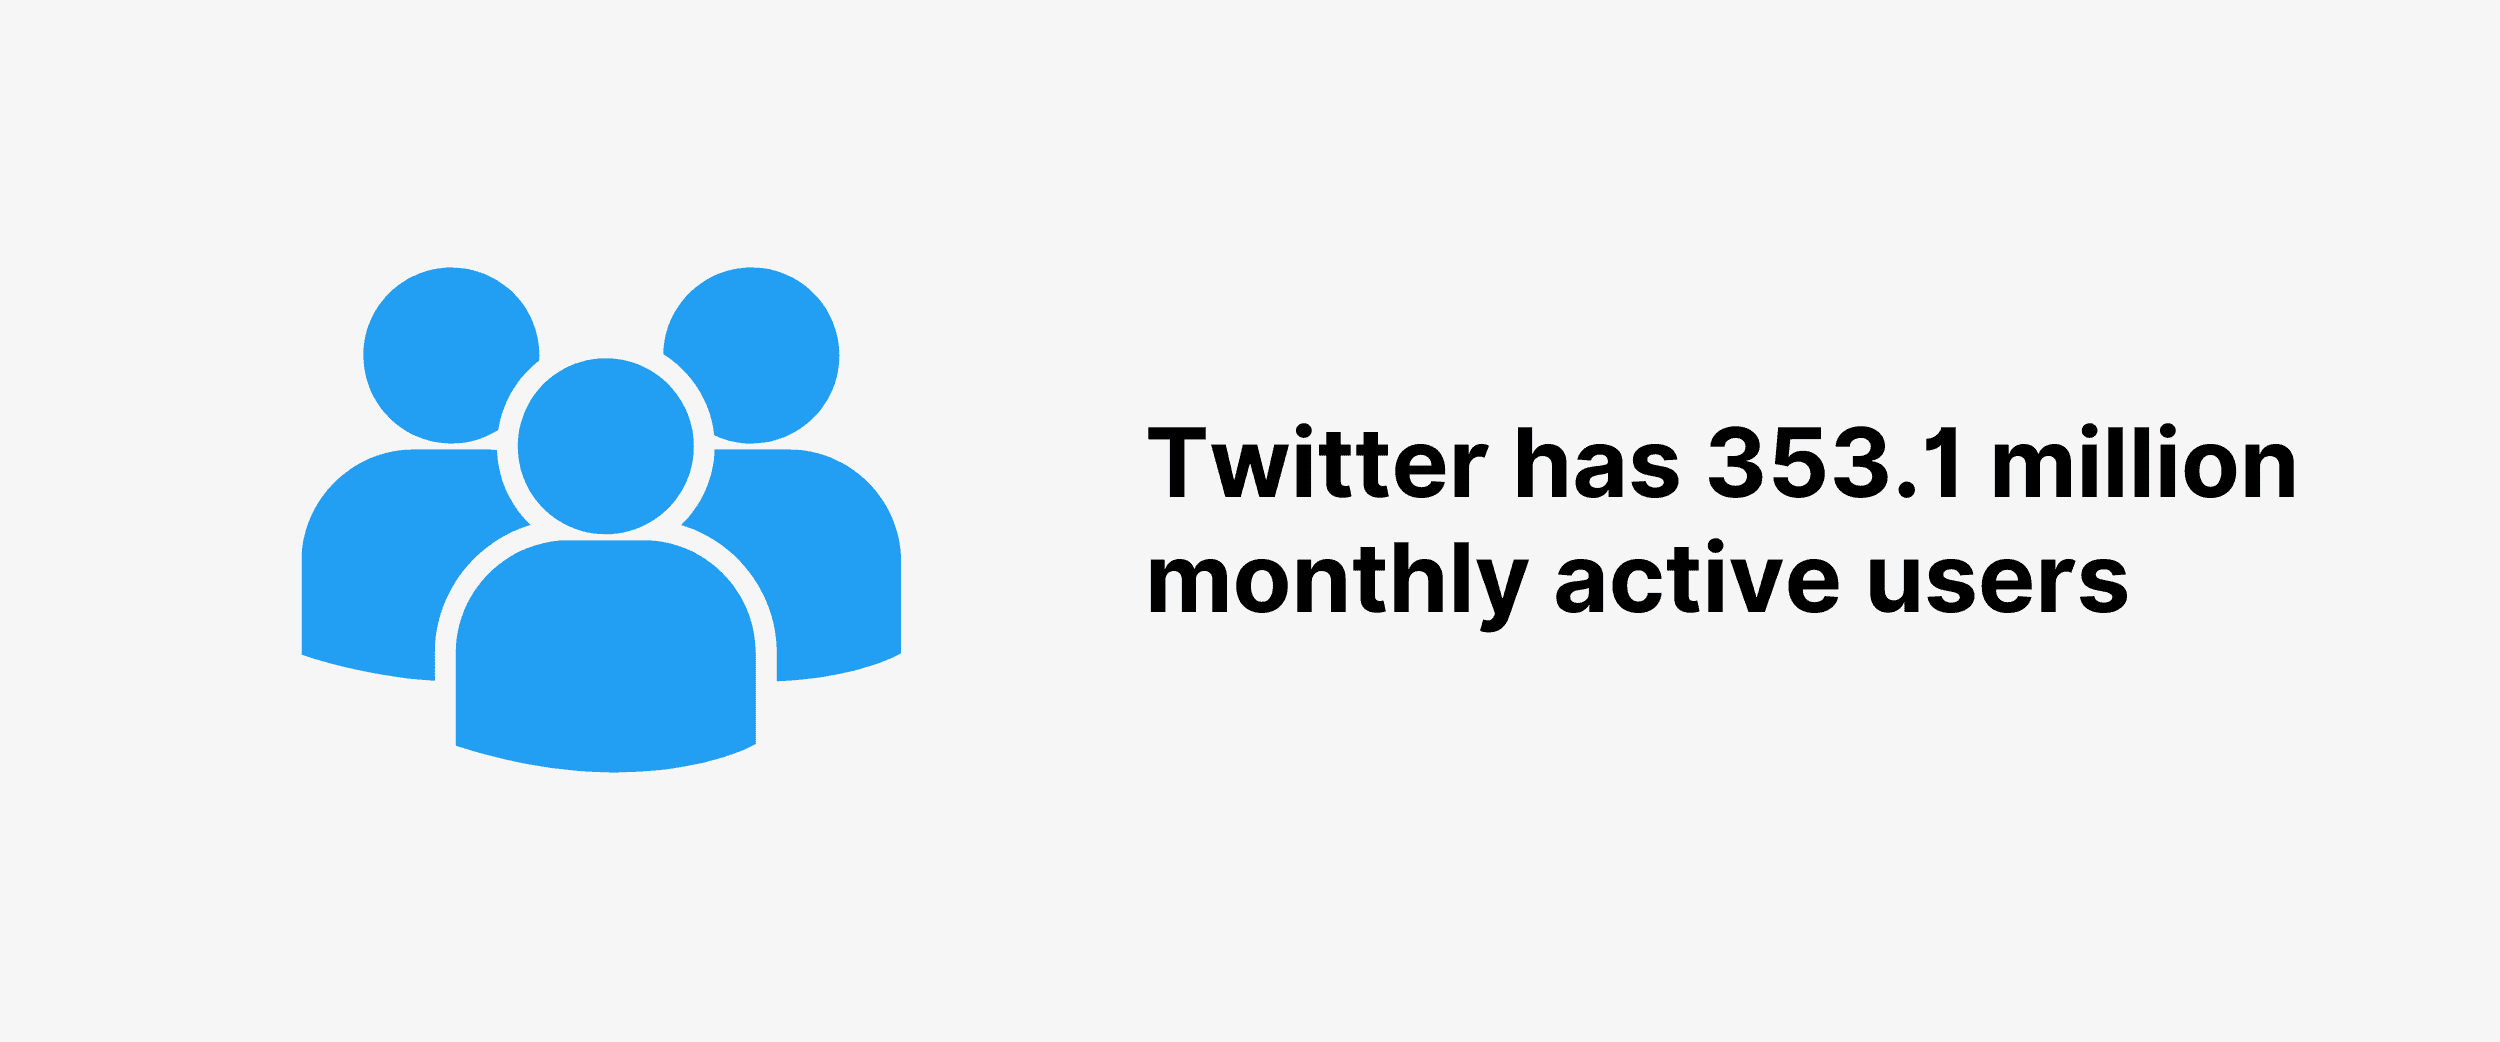 Twitter has 353.1 million monthly active users